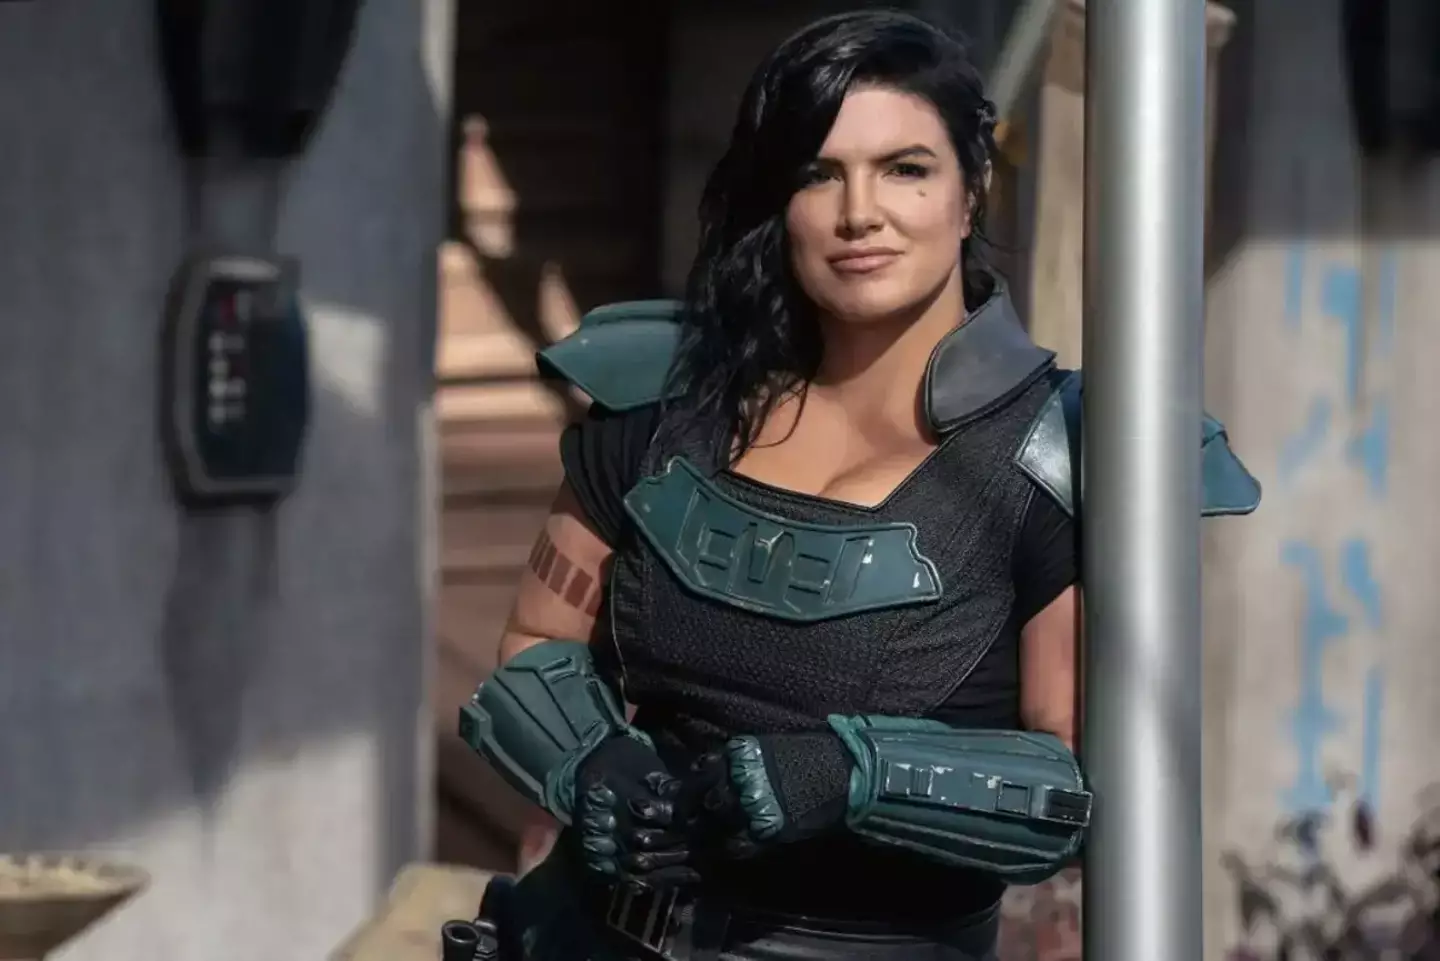 Gina Carano was dropped from Disney in 2021.